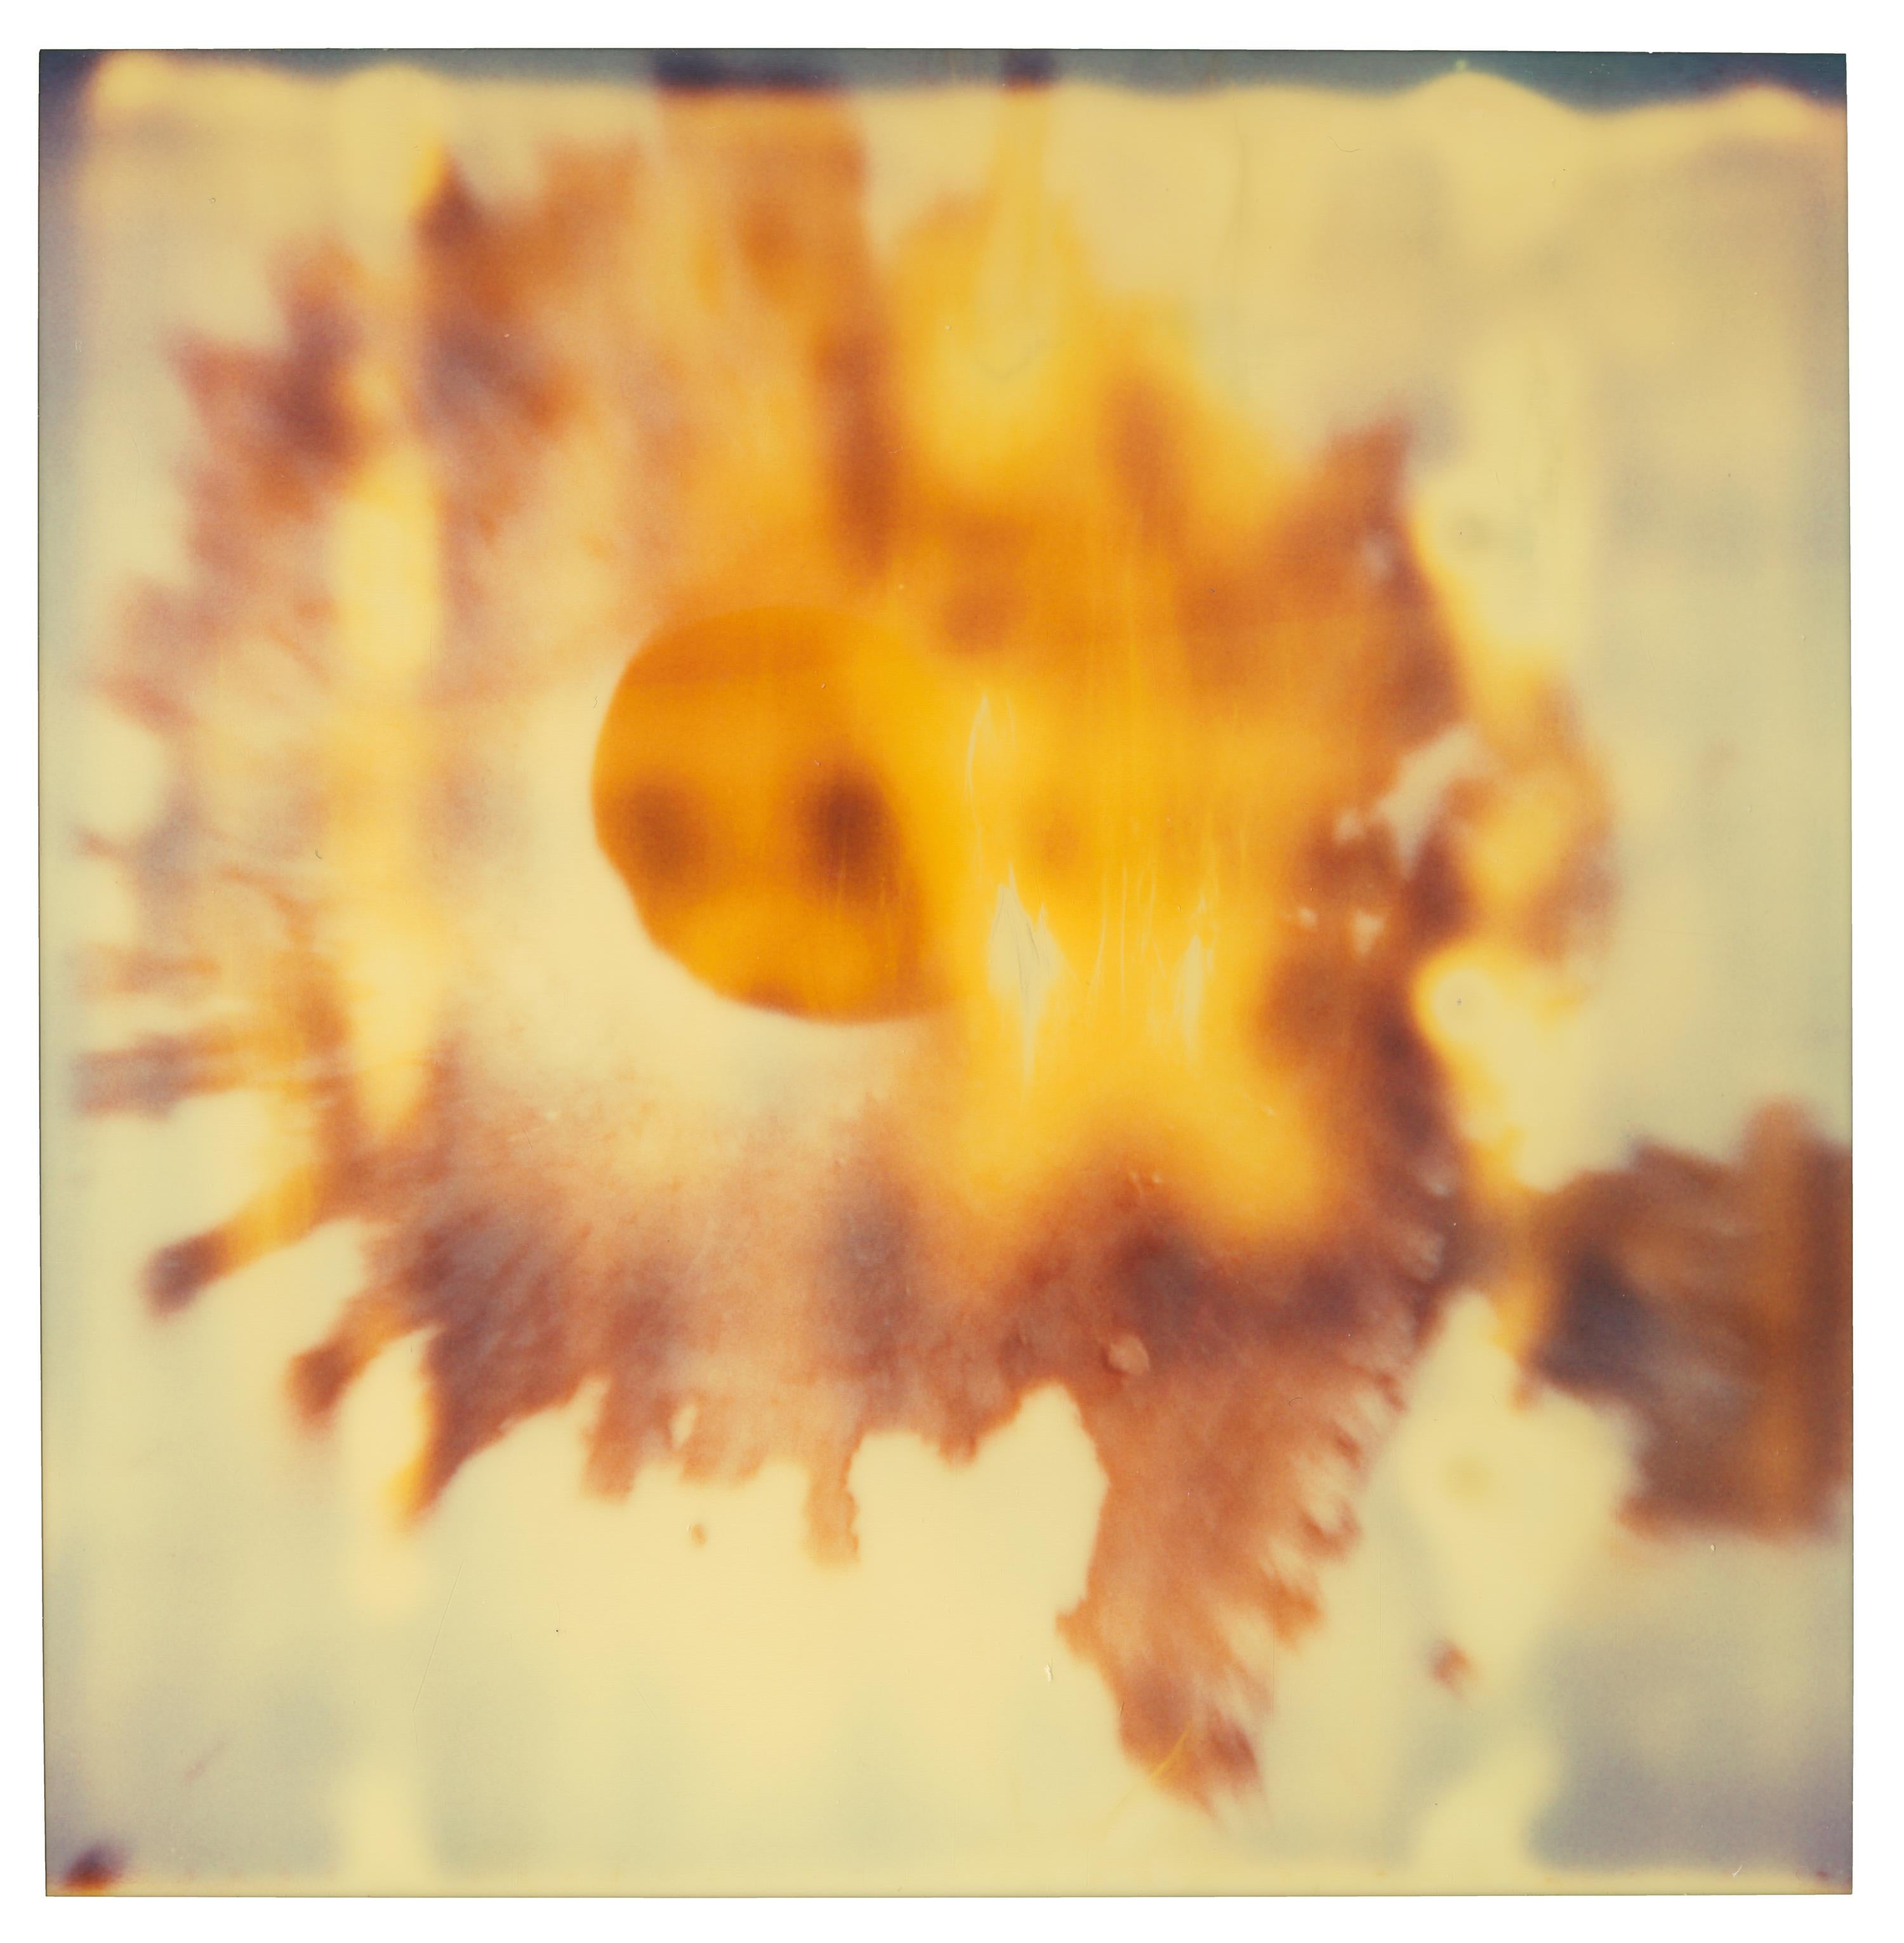 Shells and Impact (Wastelands) - mounted - Contemporary, Abstract, Polaroid - Beige Color Photograph by Stefanie Schneider